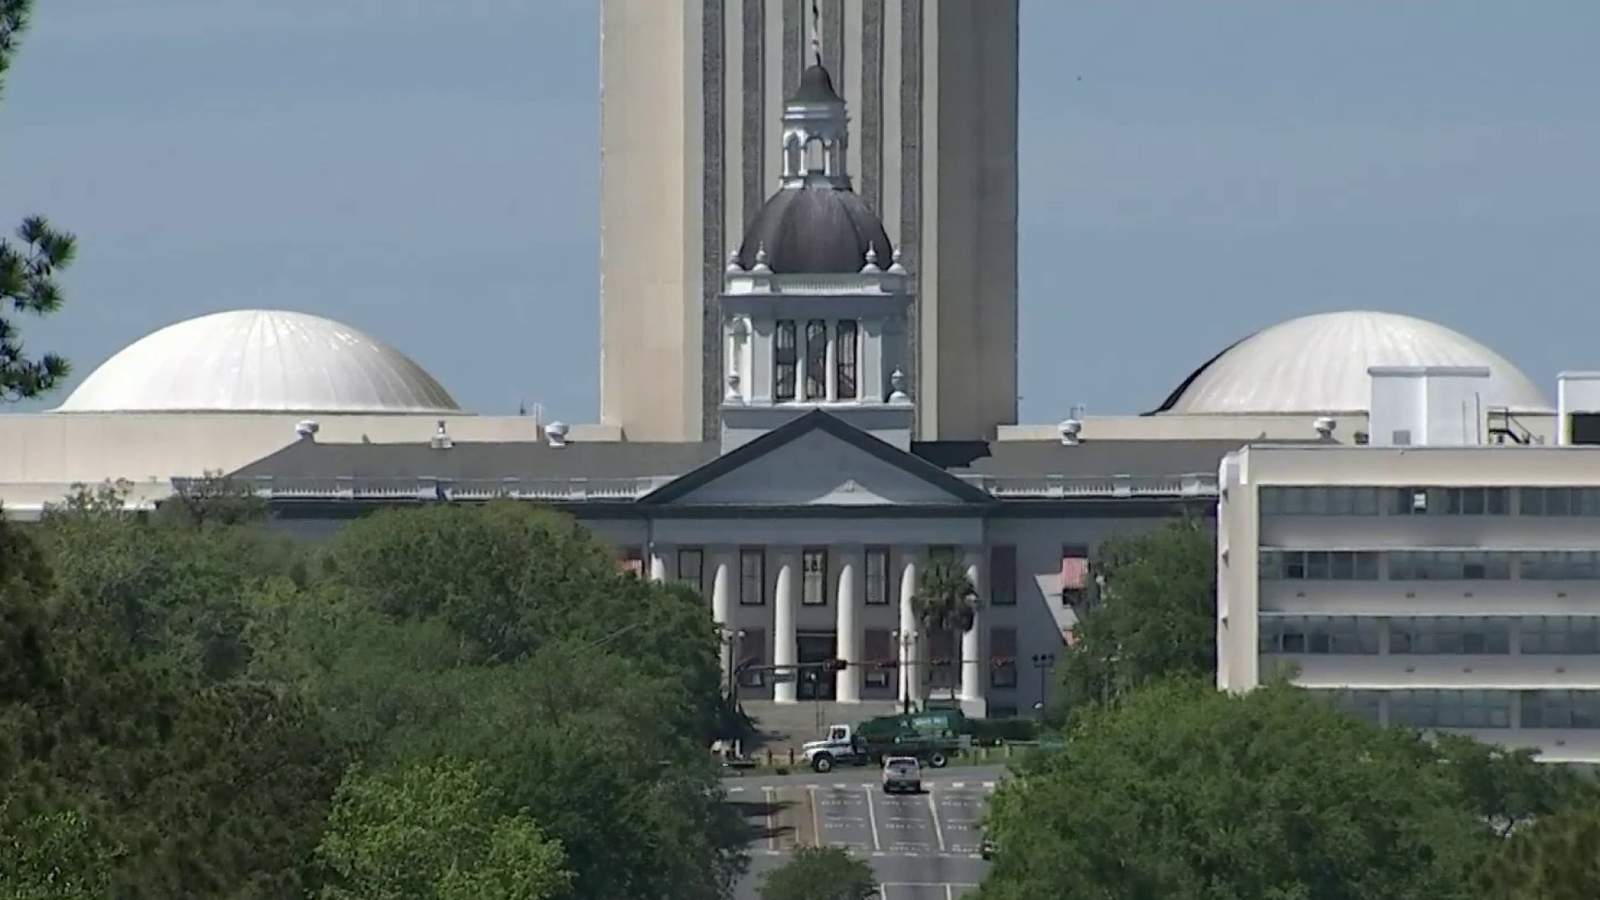 State senator test positive for COVID-19 as Legislature gathers in Tallahassee